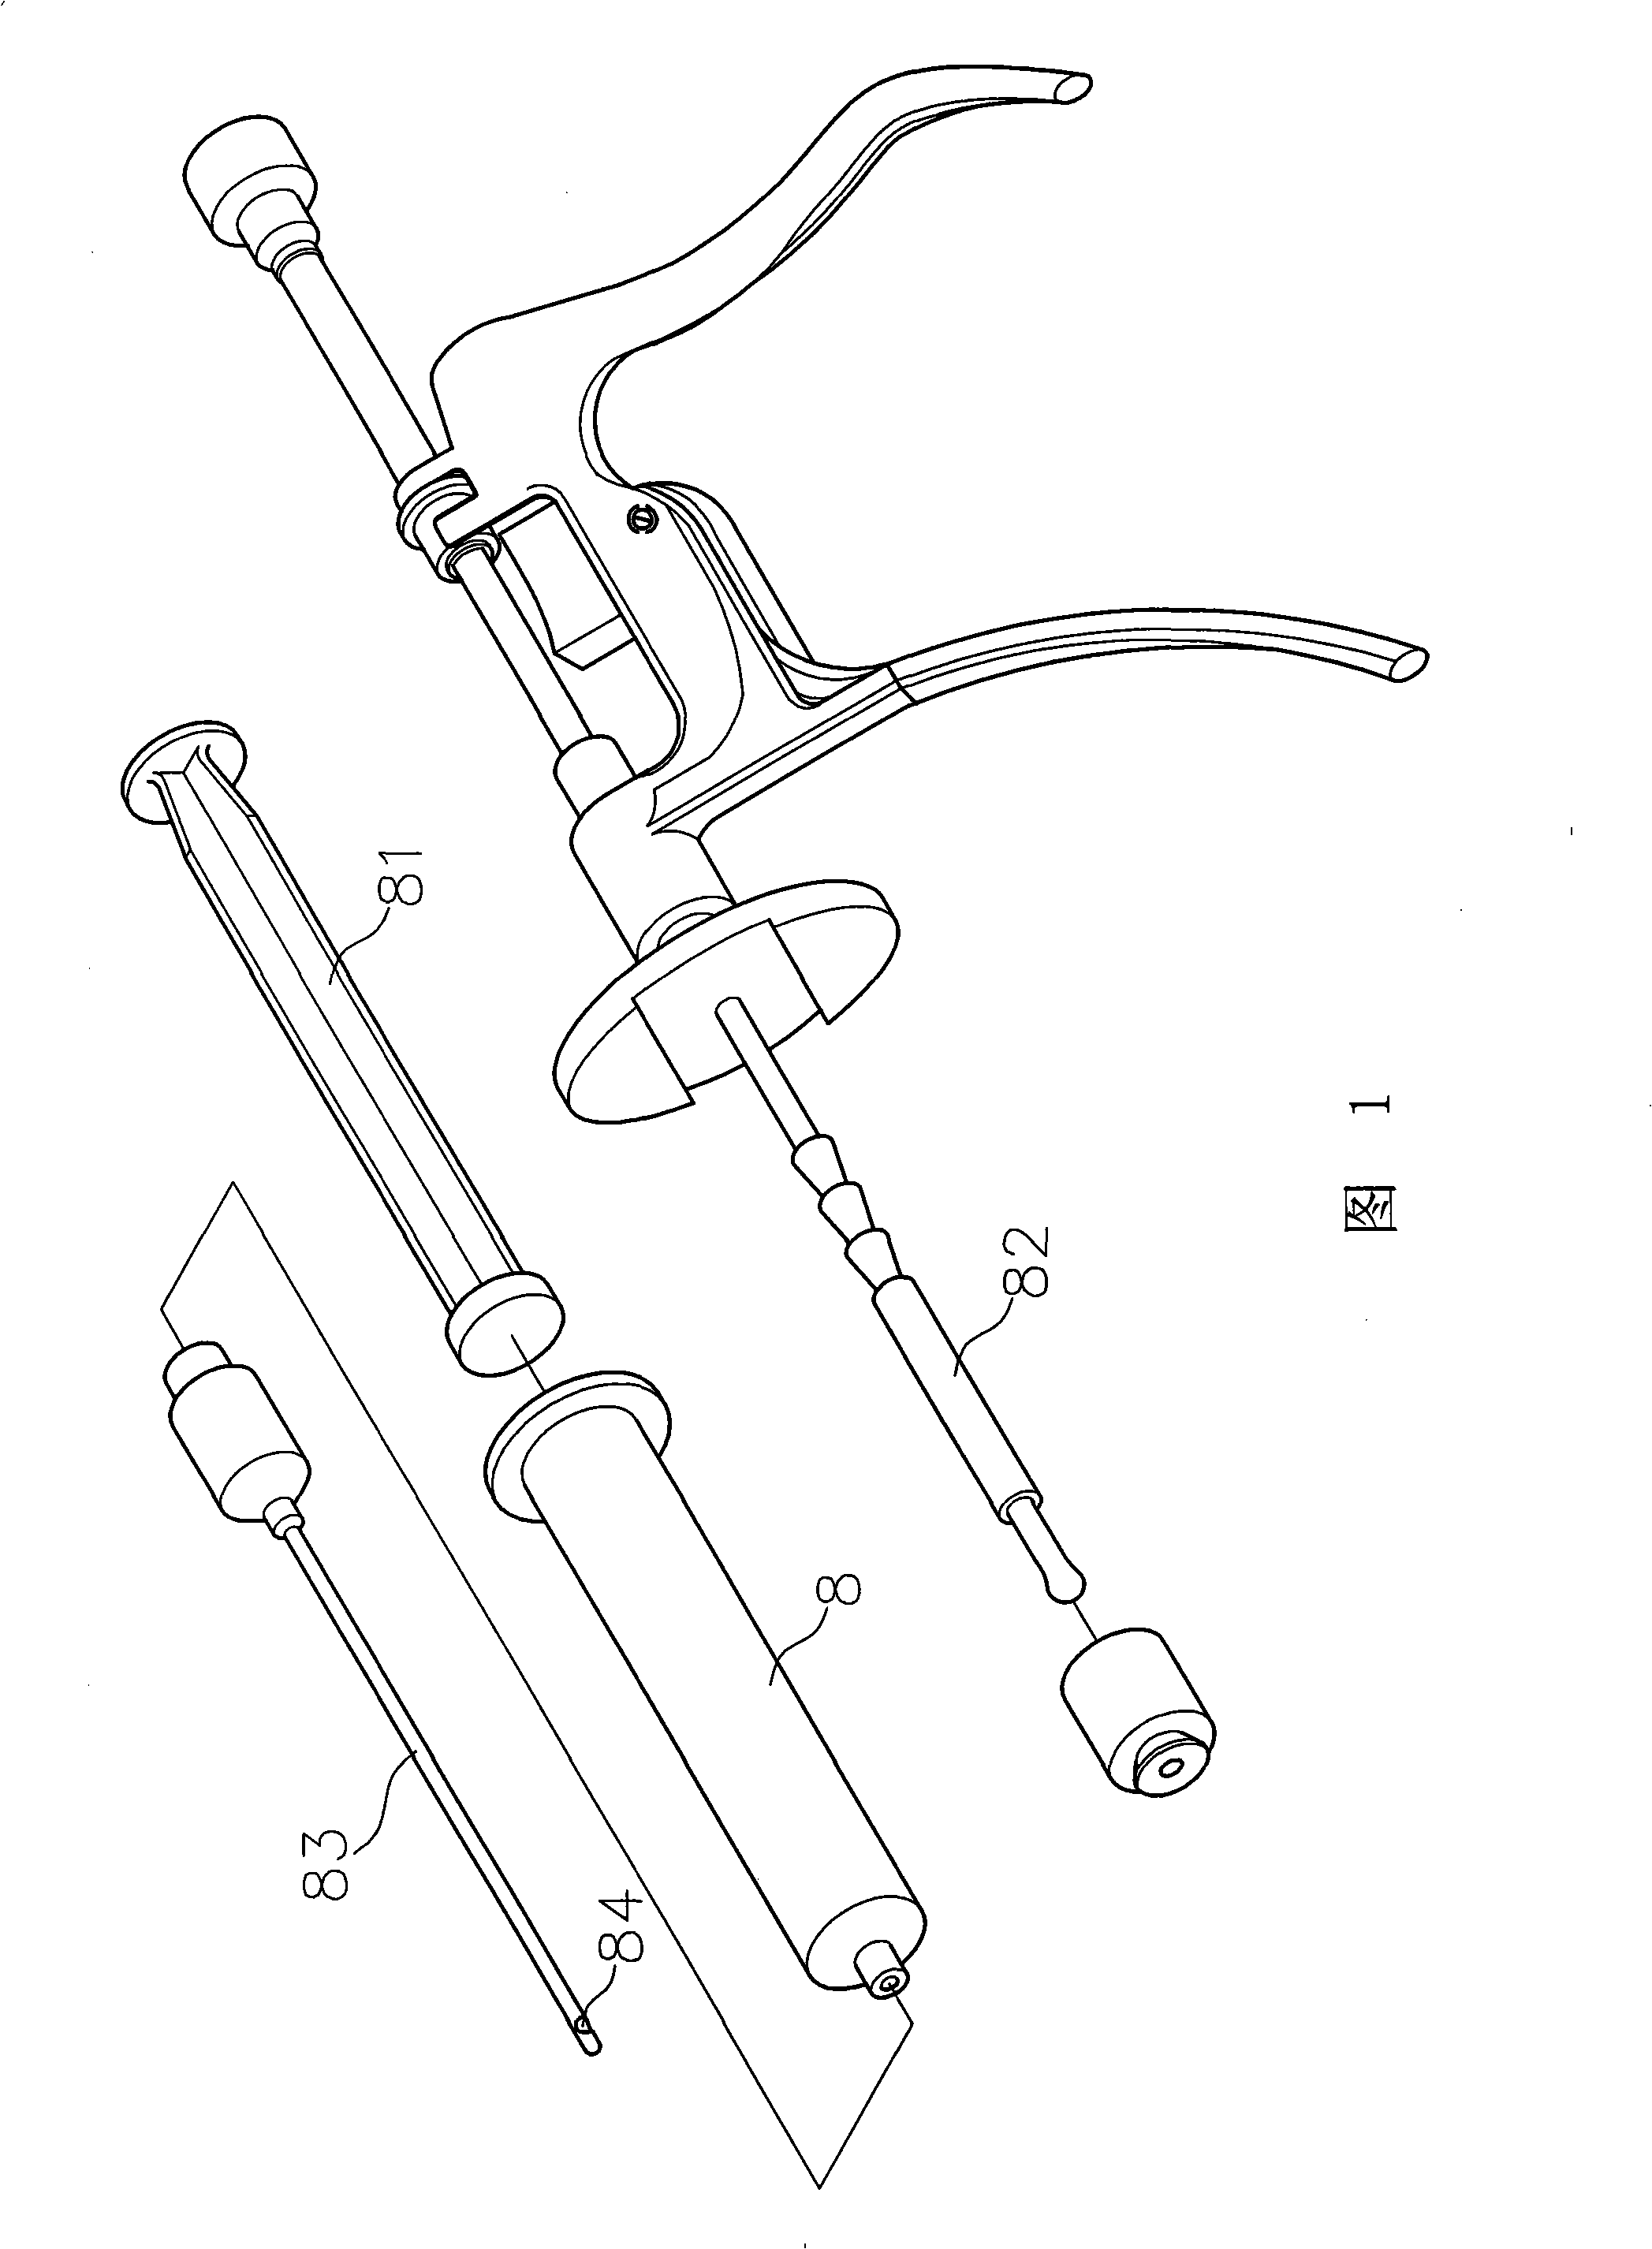 Adjustable microinjection apparatus